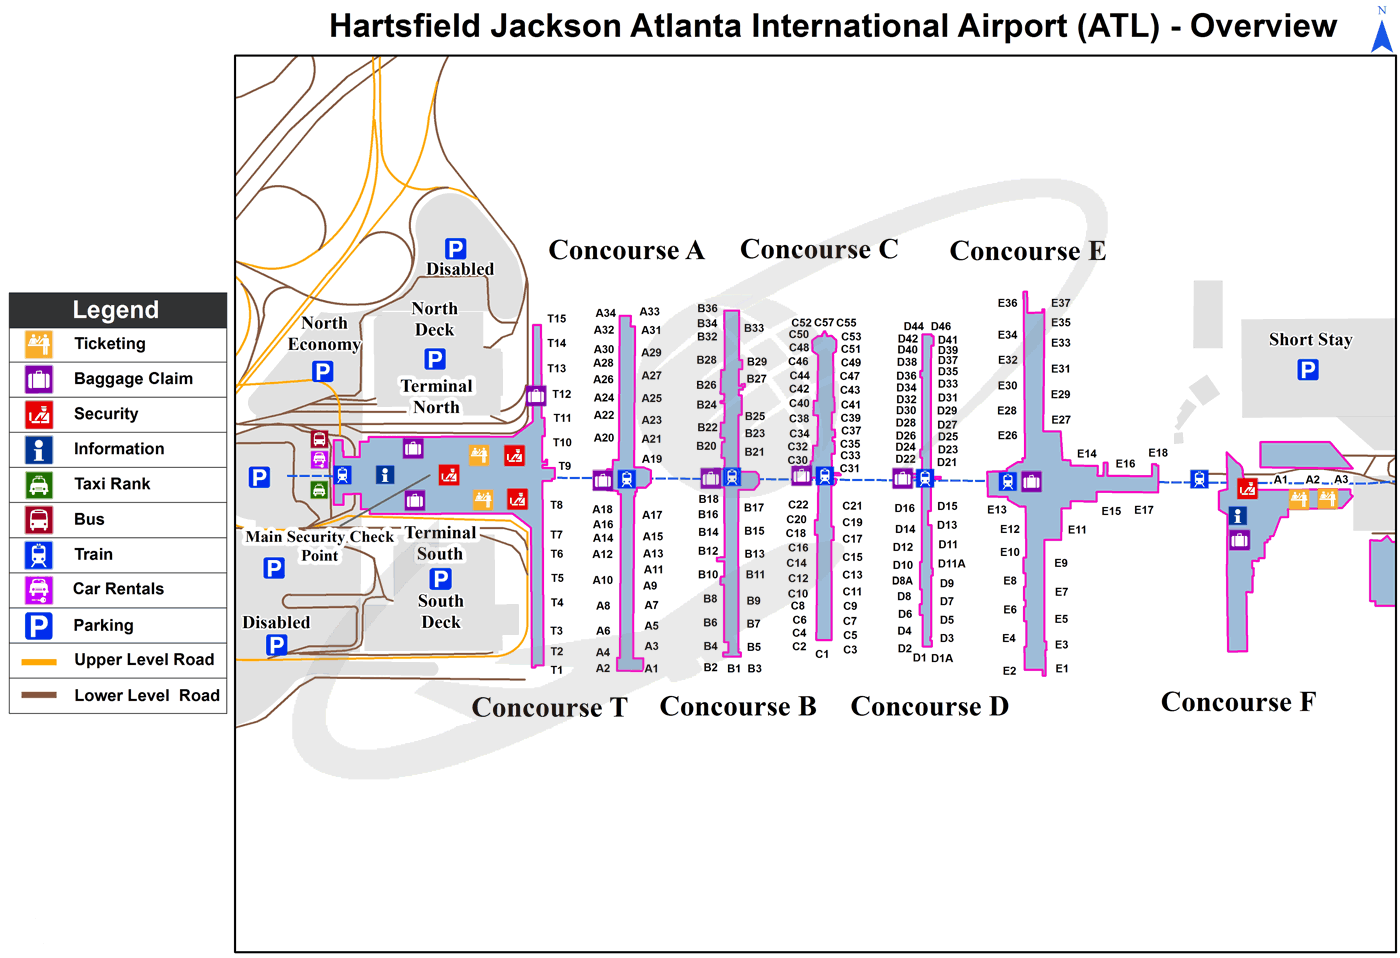 ATL_overview_map.png